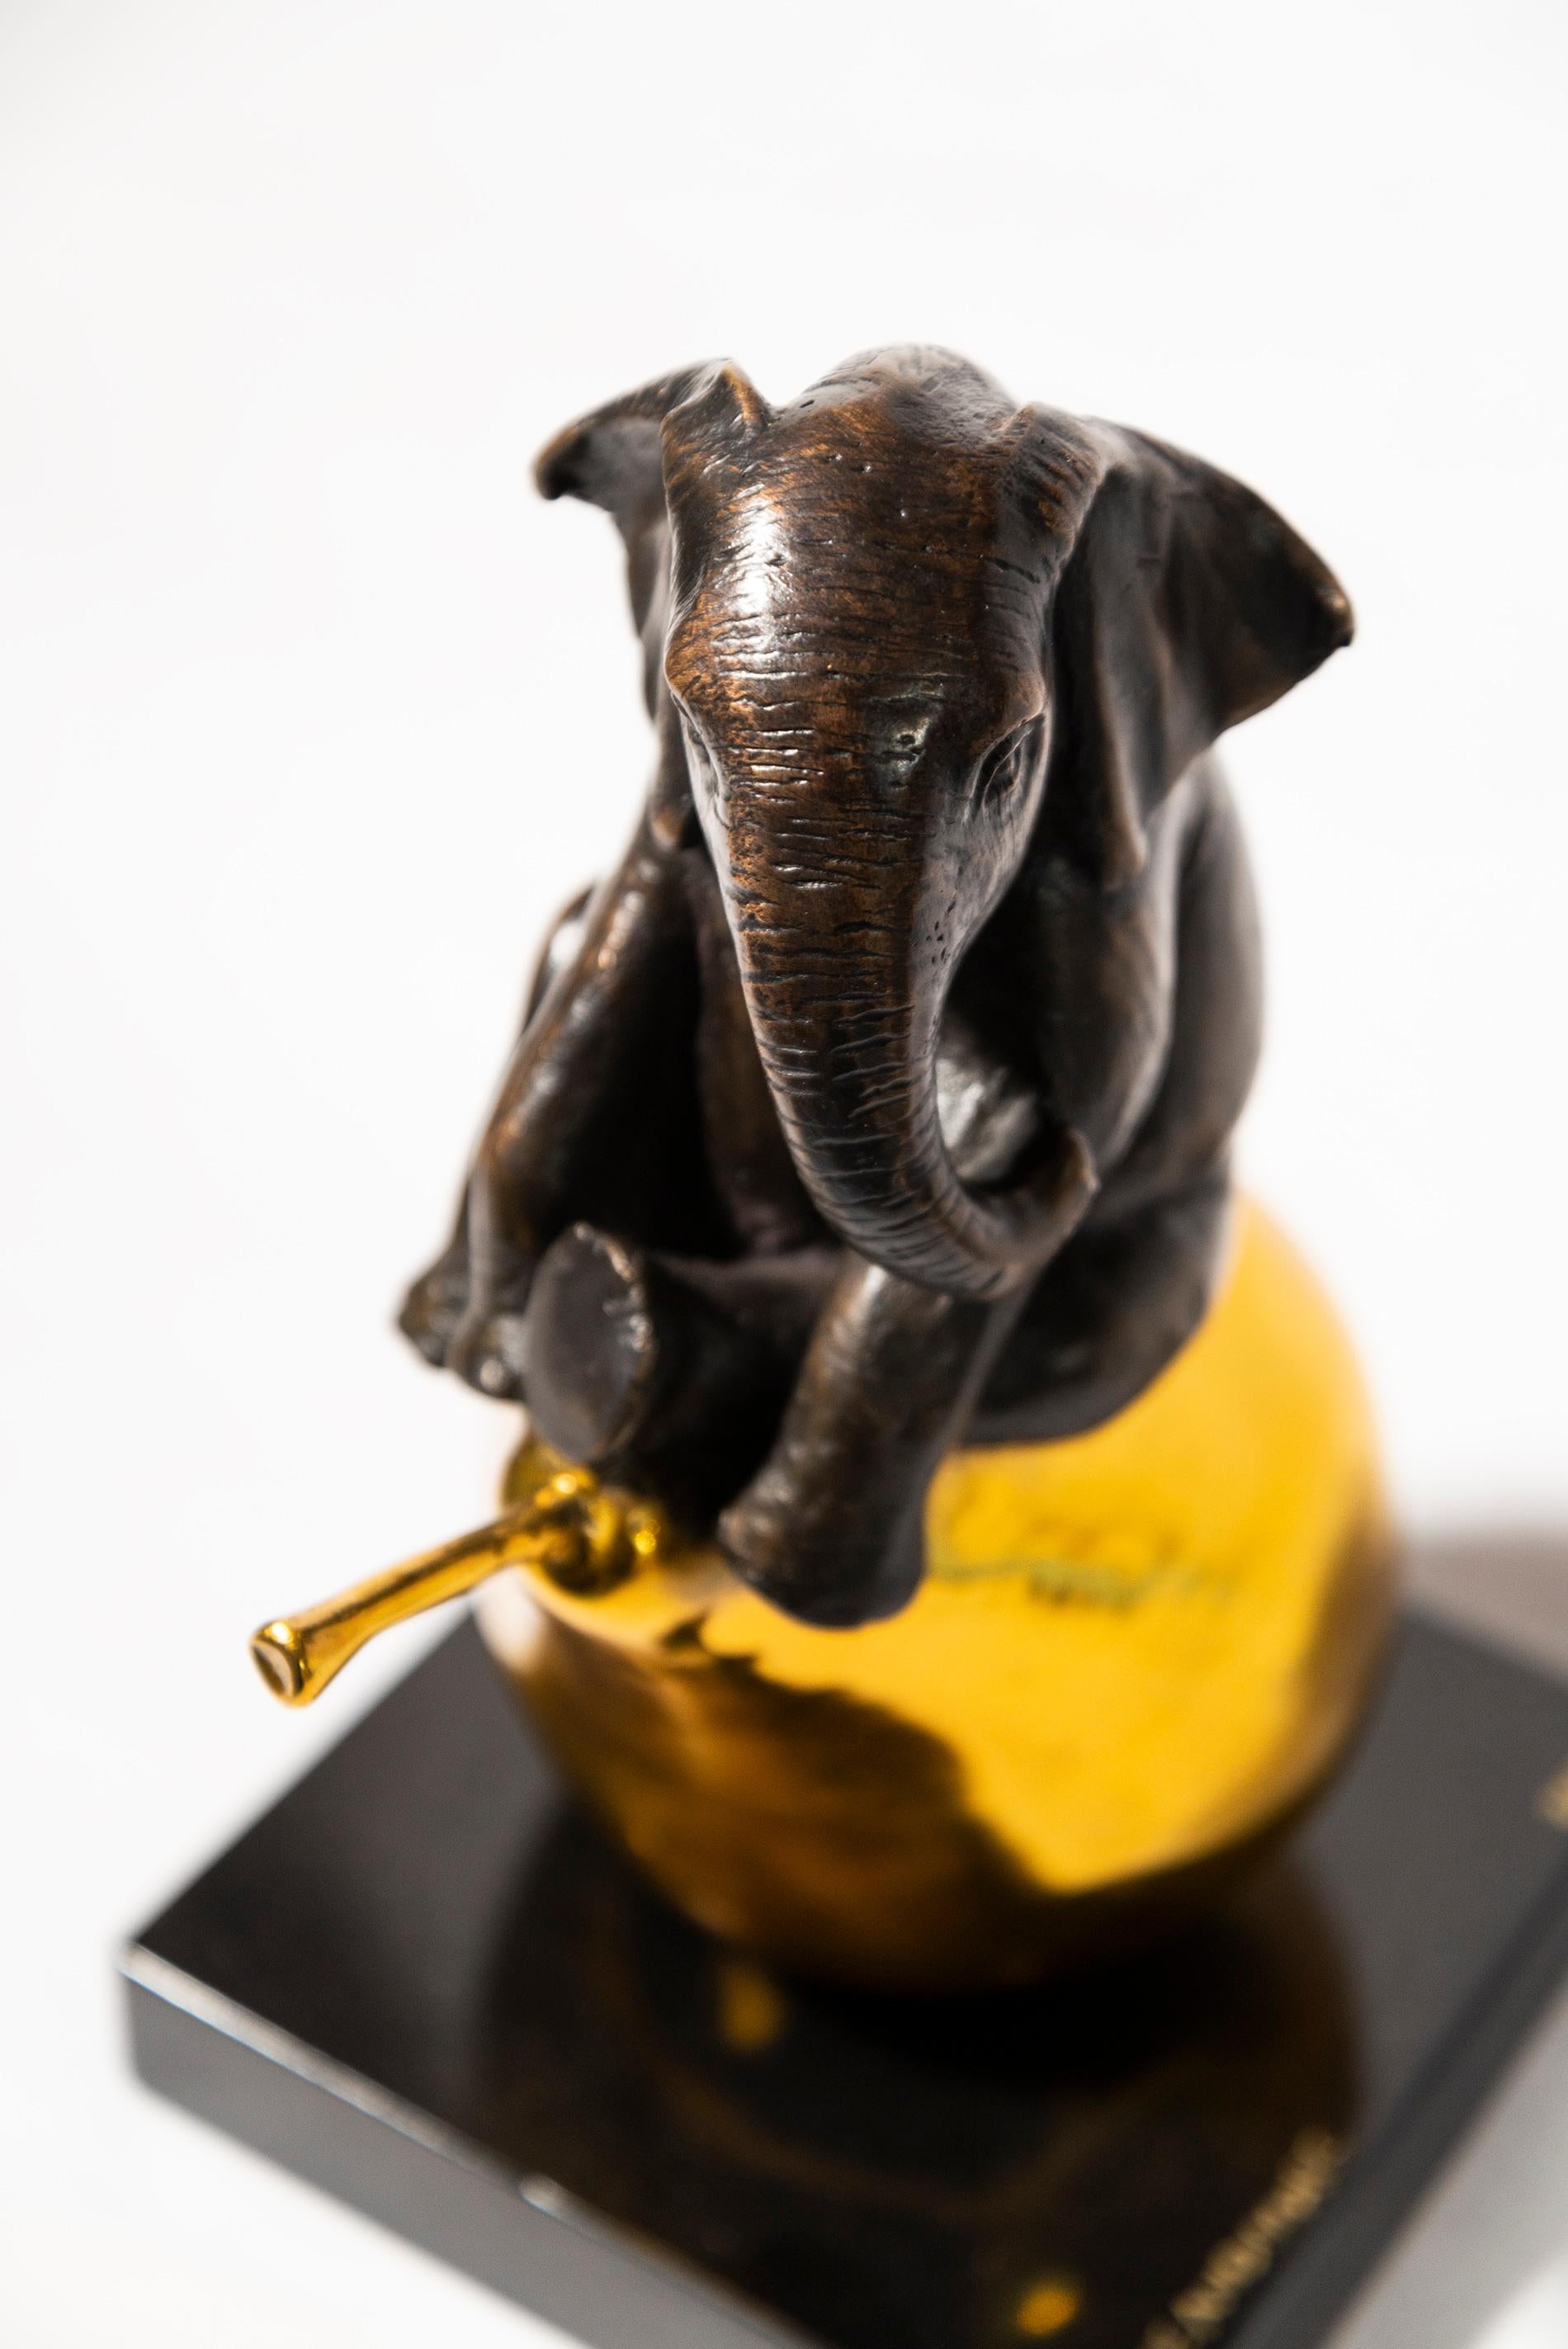 The elephant was just pearfect 2/40 - playful, contemporary, bronze sculpture - Contemporary Sculpture by Gillie and Marc Schattner